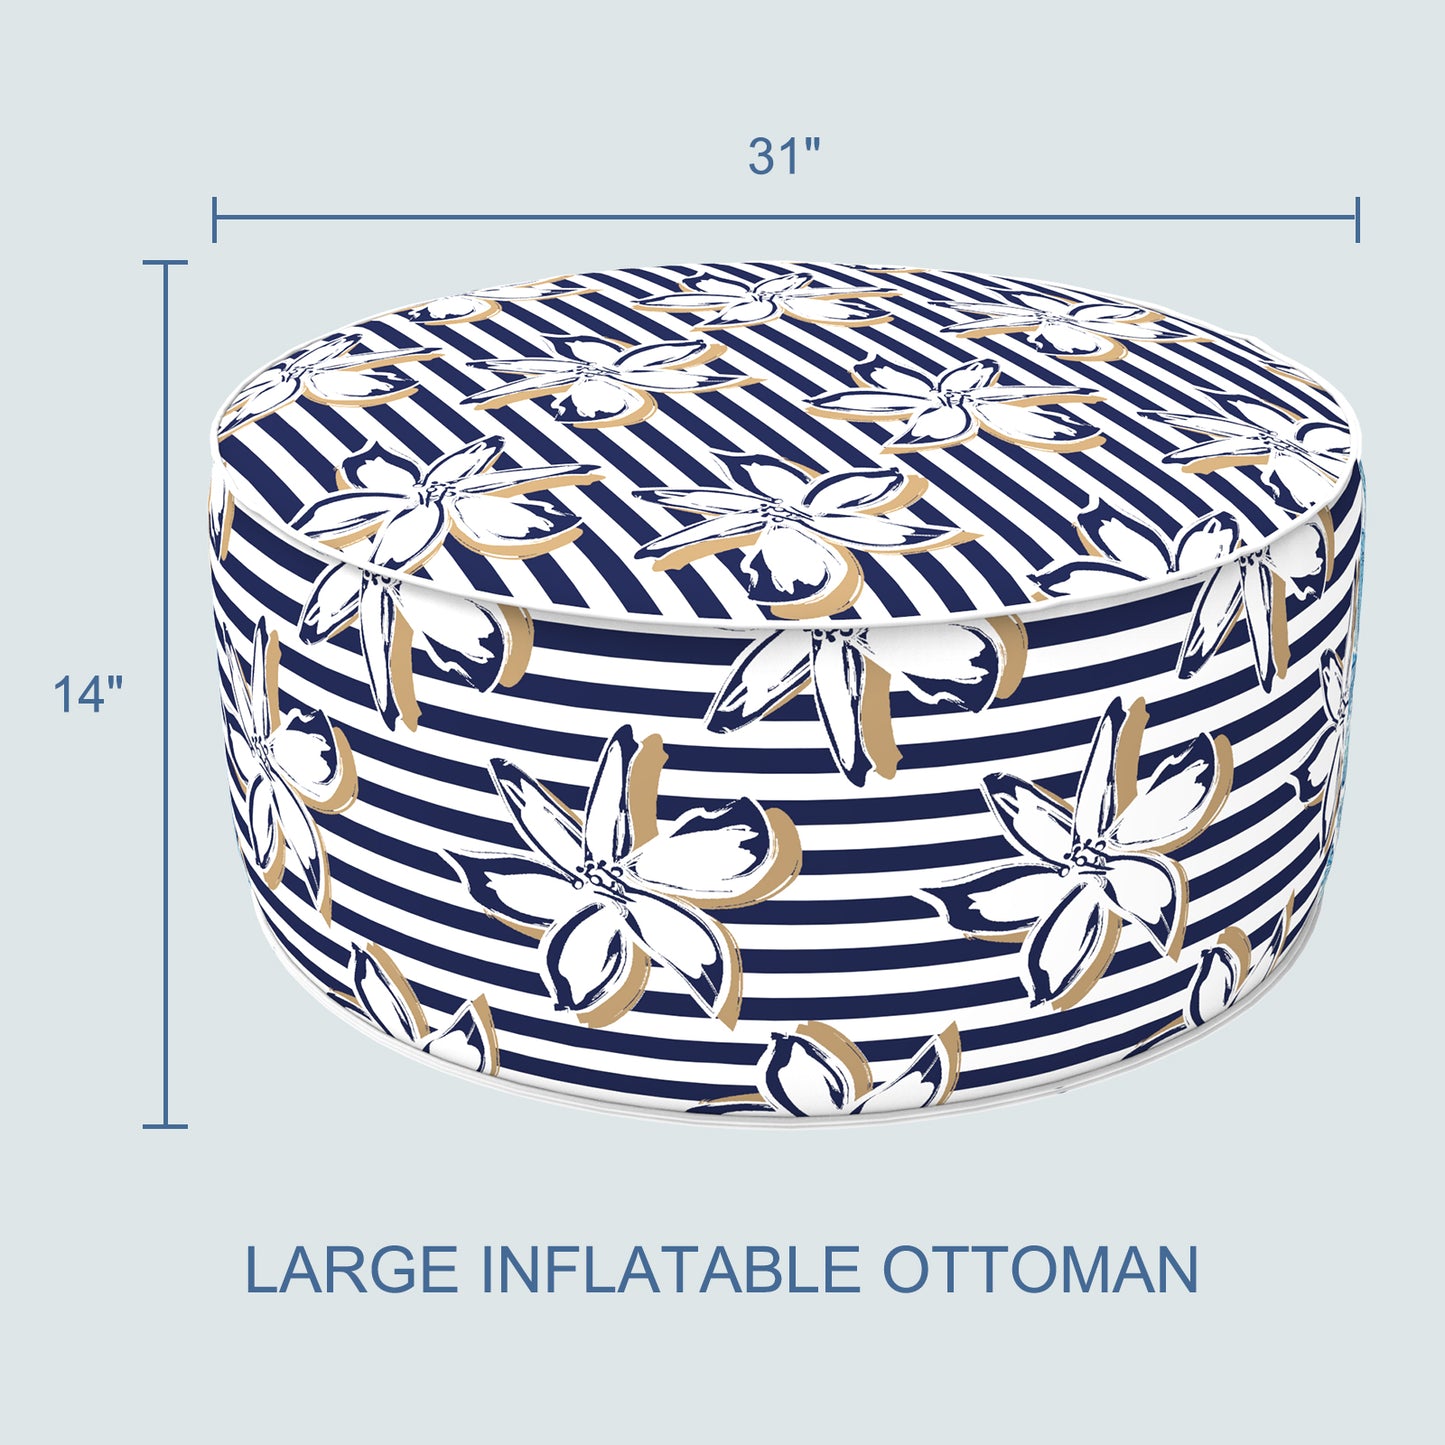 Outdoor Inflatable Stool Ottoman, All Weather Portable Footrest Stool, Furniture Stool Ottomans for Home Garden Beach, D31”xH14”, Clemens Cabana Navy